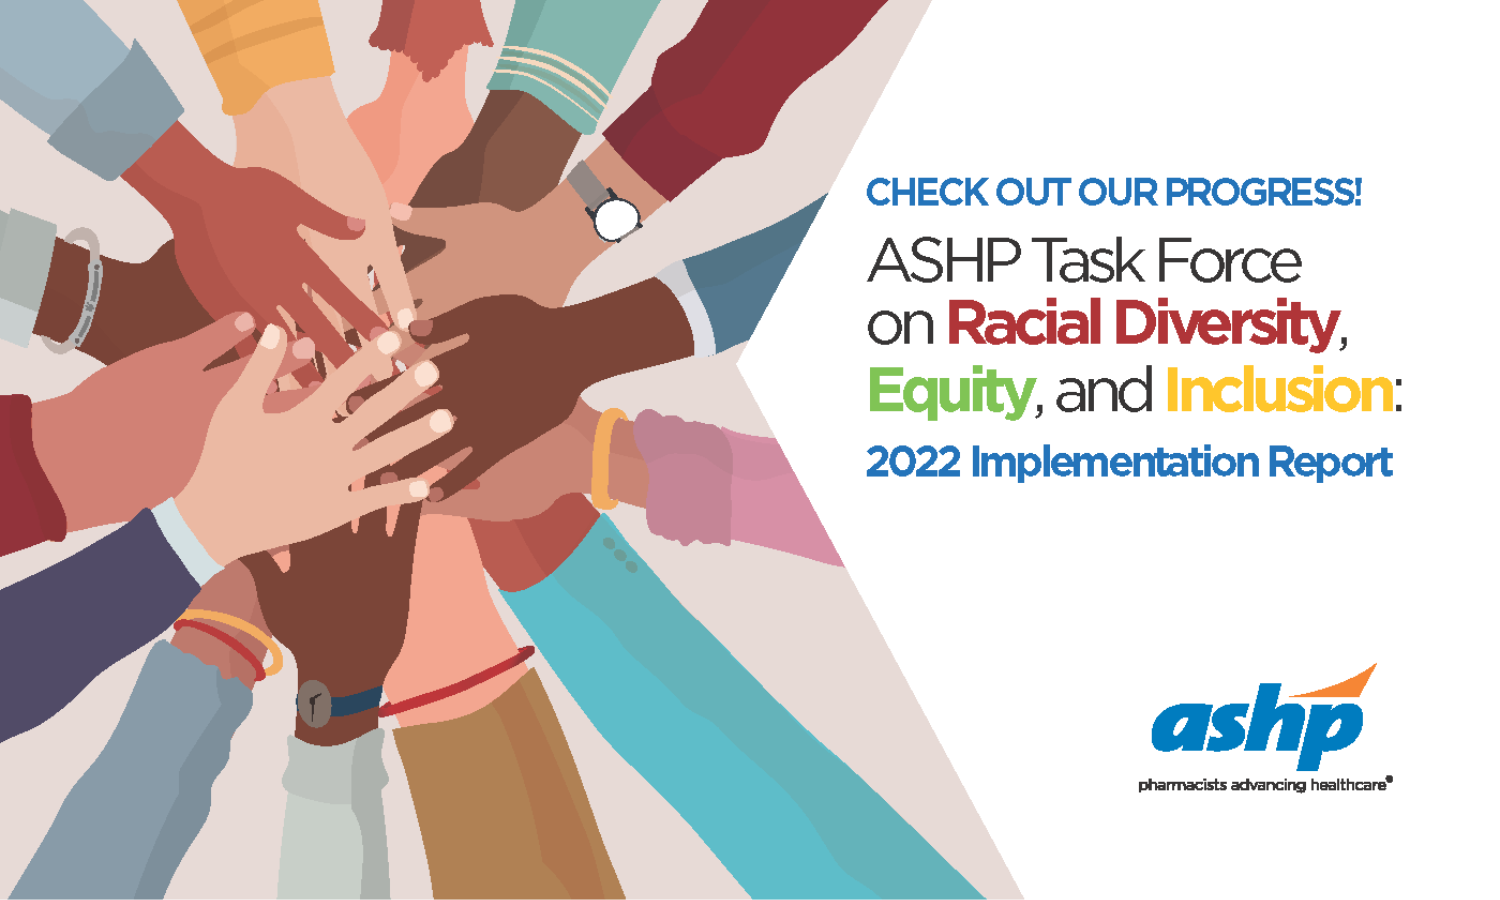 Check out our progress -  ashp task force on racial diversity, equity, and inclusion. 2022 implementation report